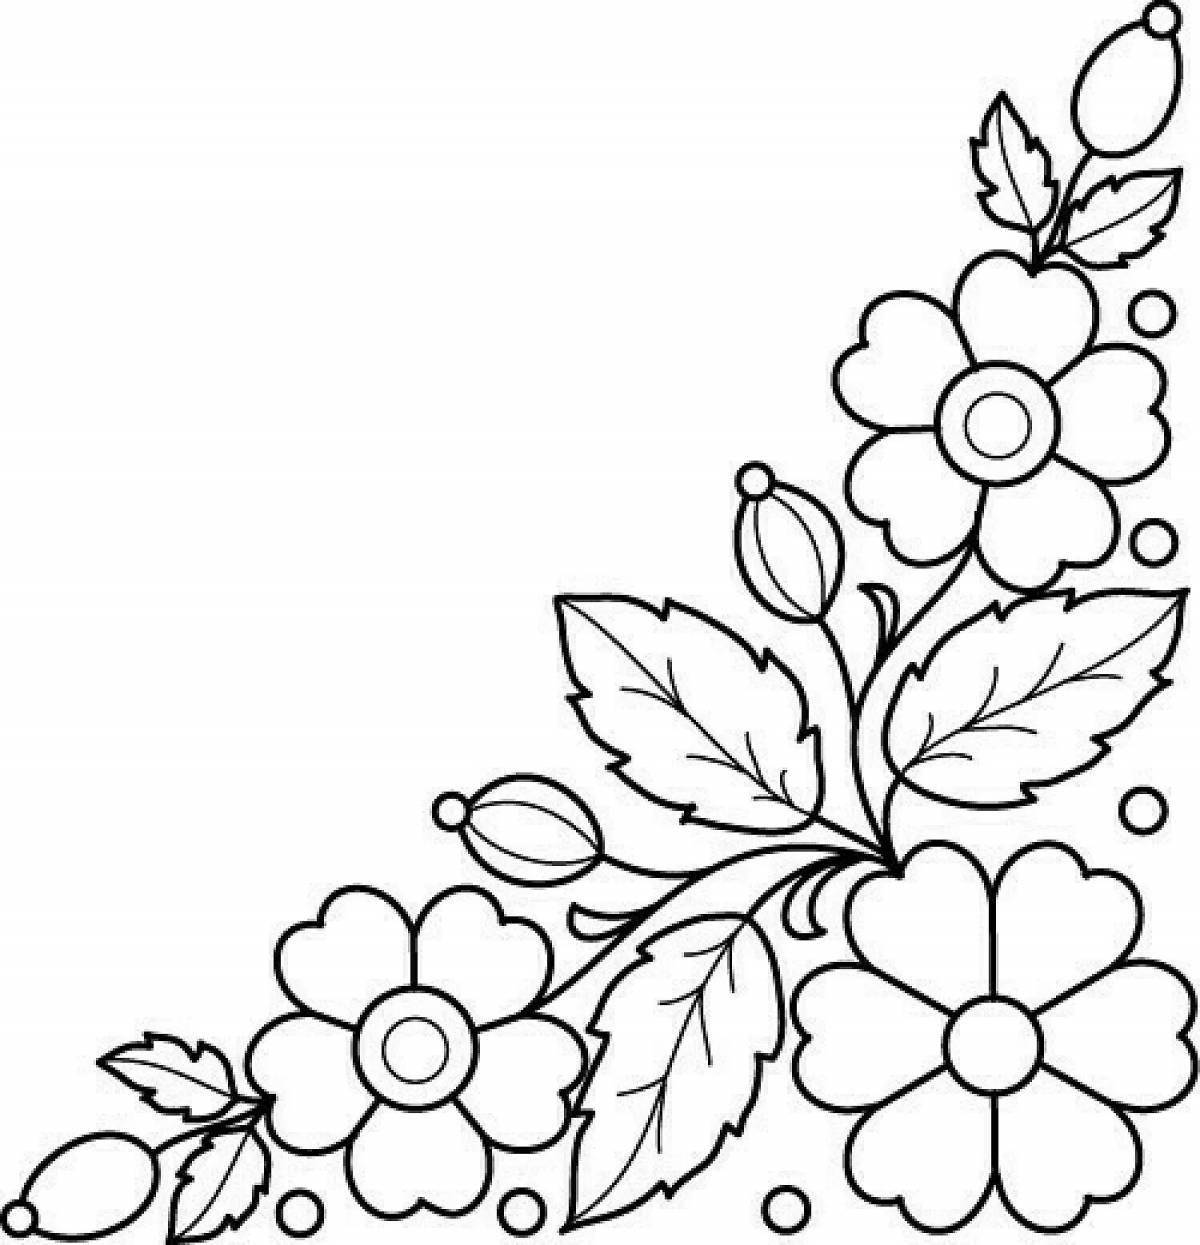 Sweet pavlovian scarf coloring pages for kids